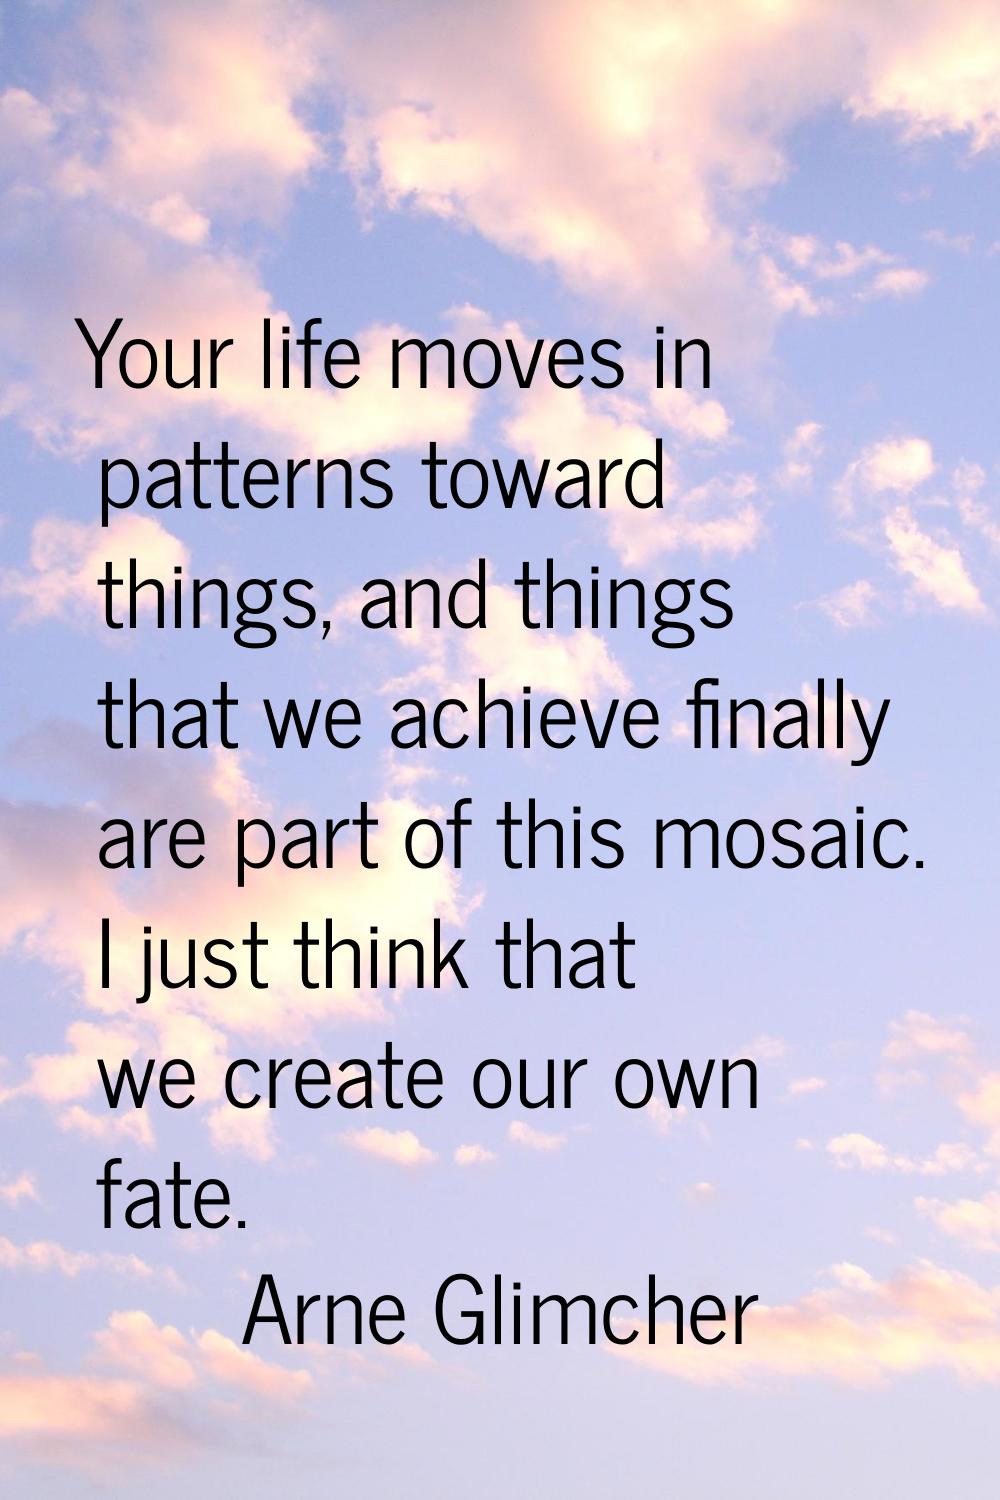 Your life moves in patterns toward things, and things that we achieve finally are part of this mosa